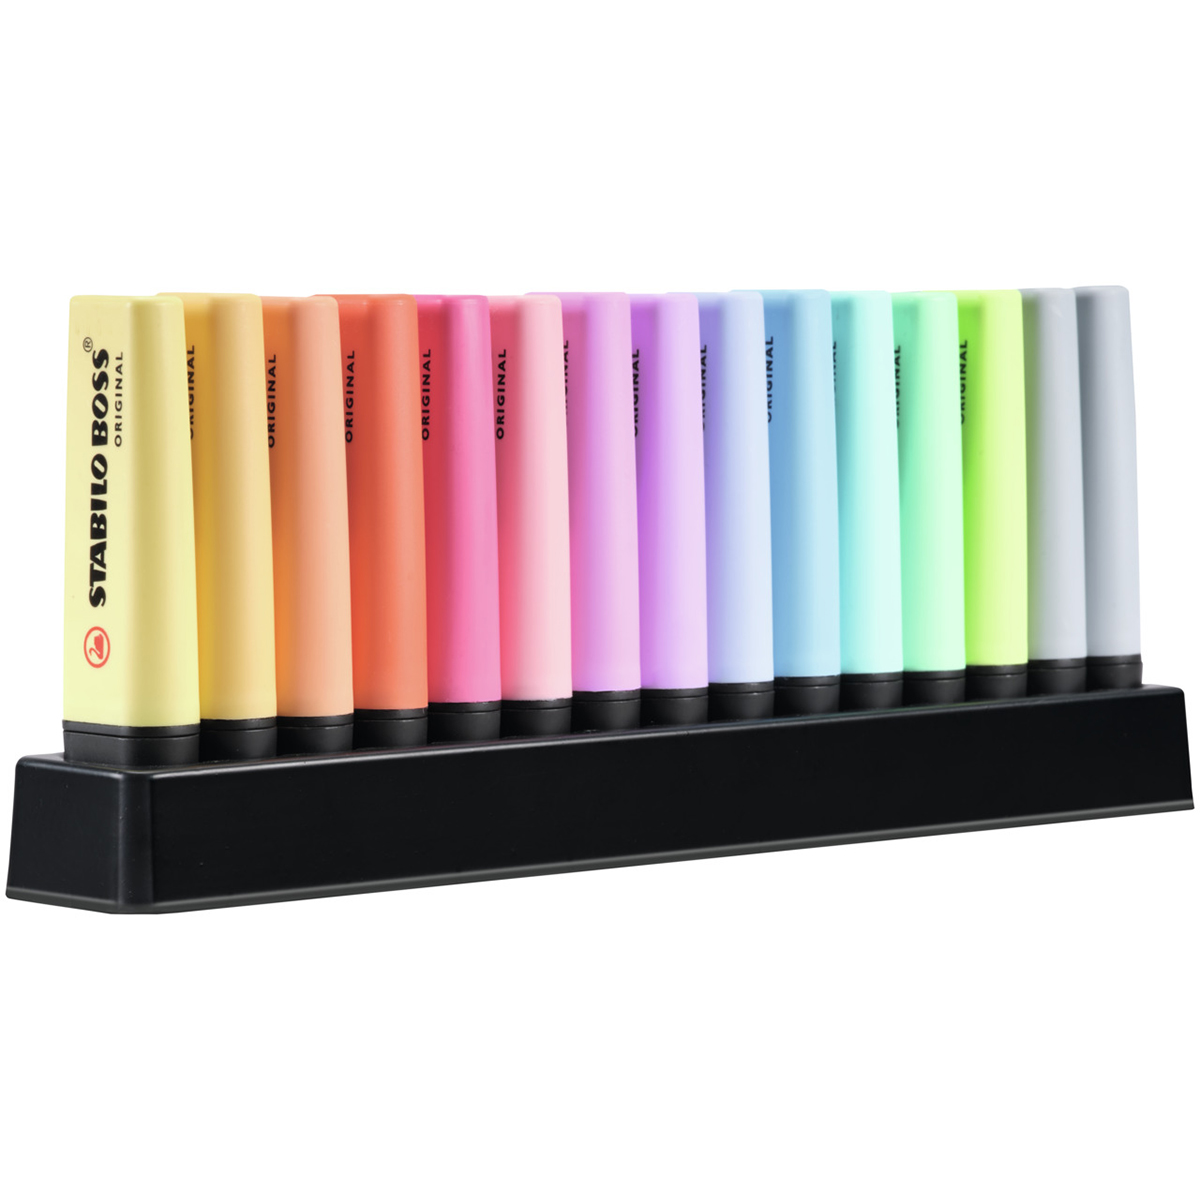 Boss Pastel Desk Set in the group Pens / Office / Markers at Pen Store (125426)